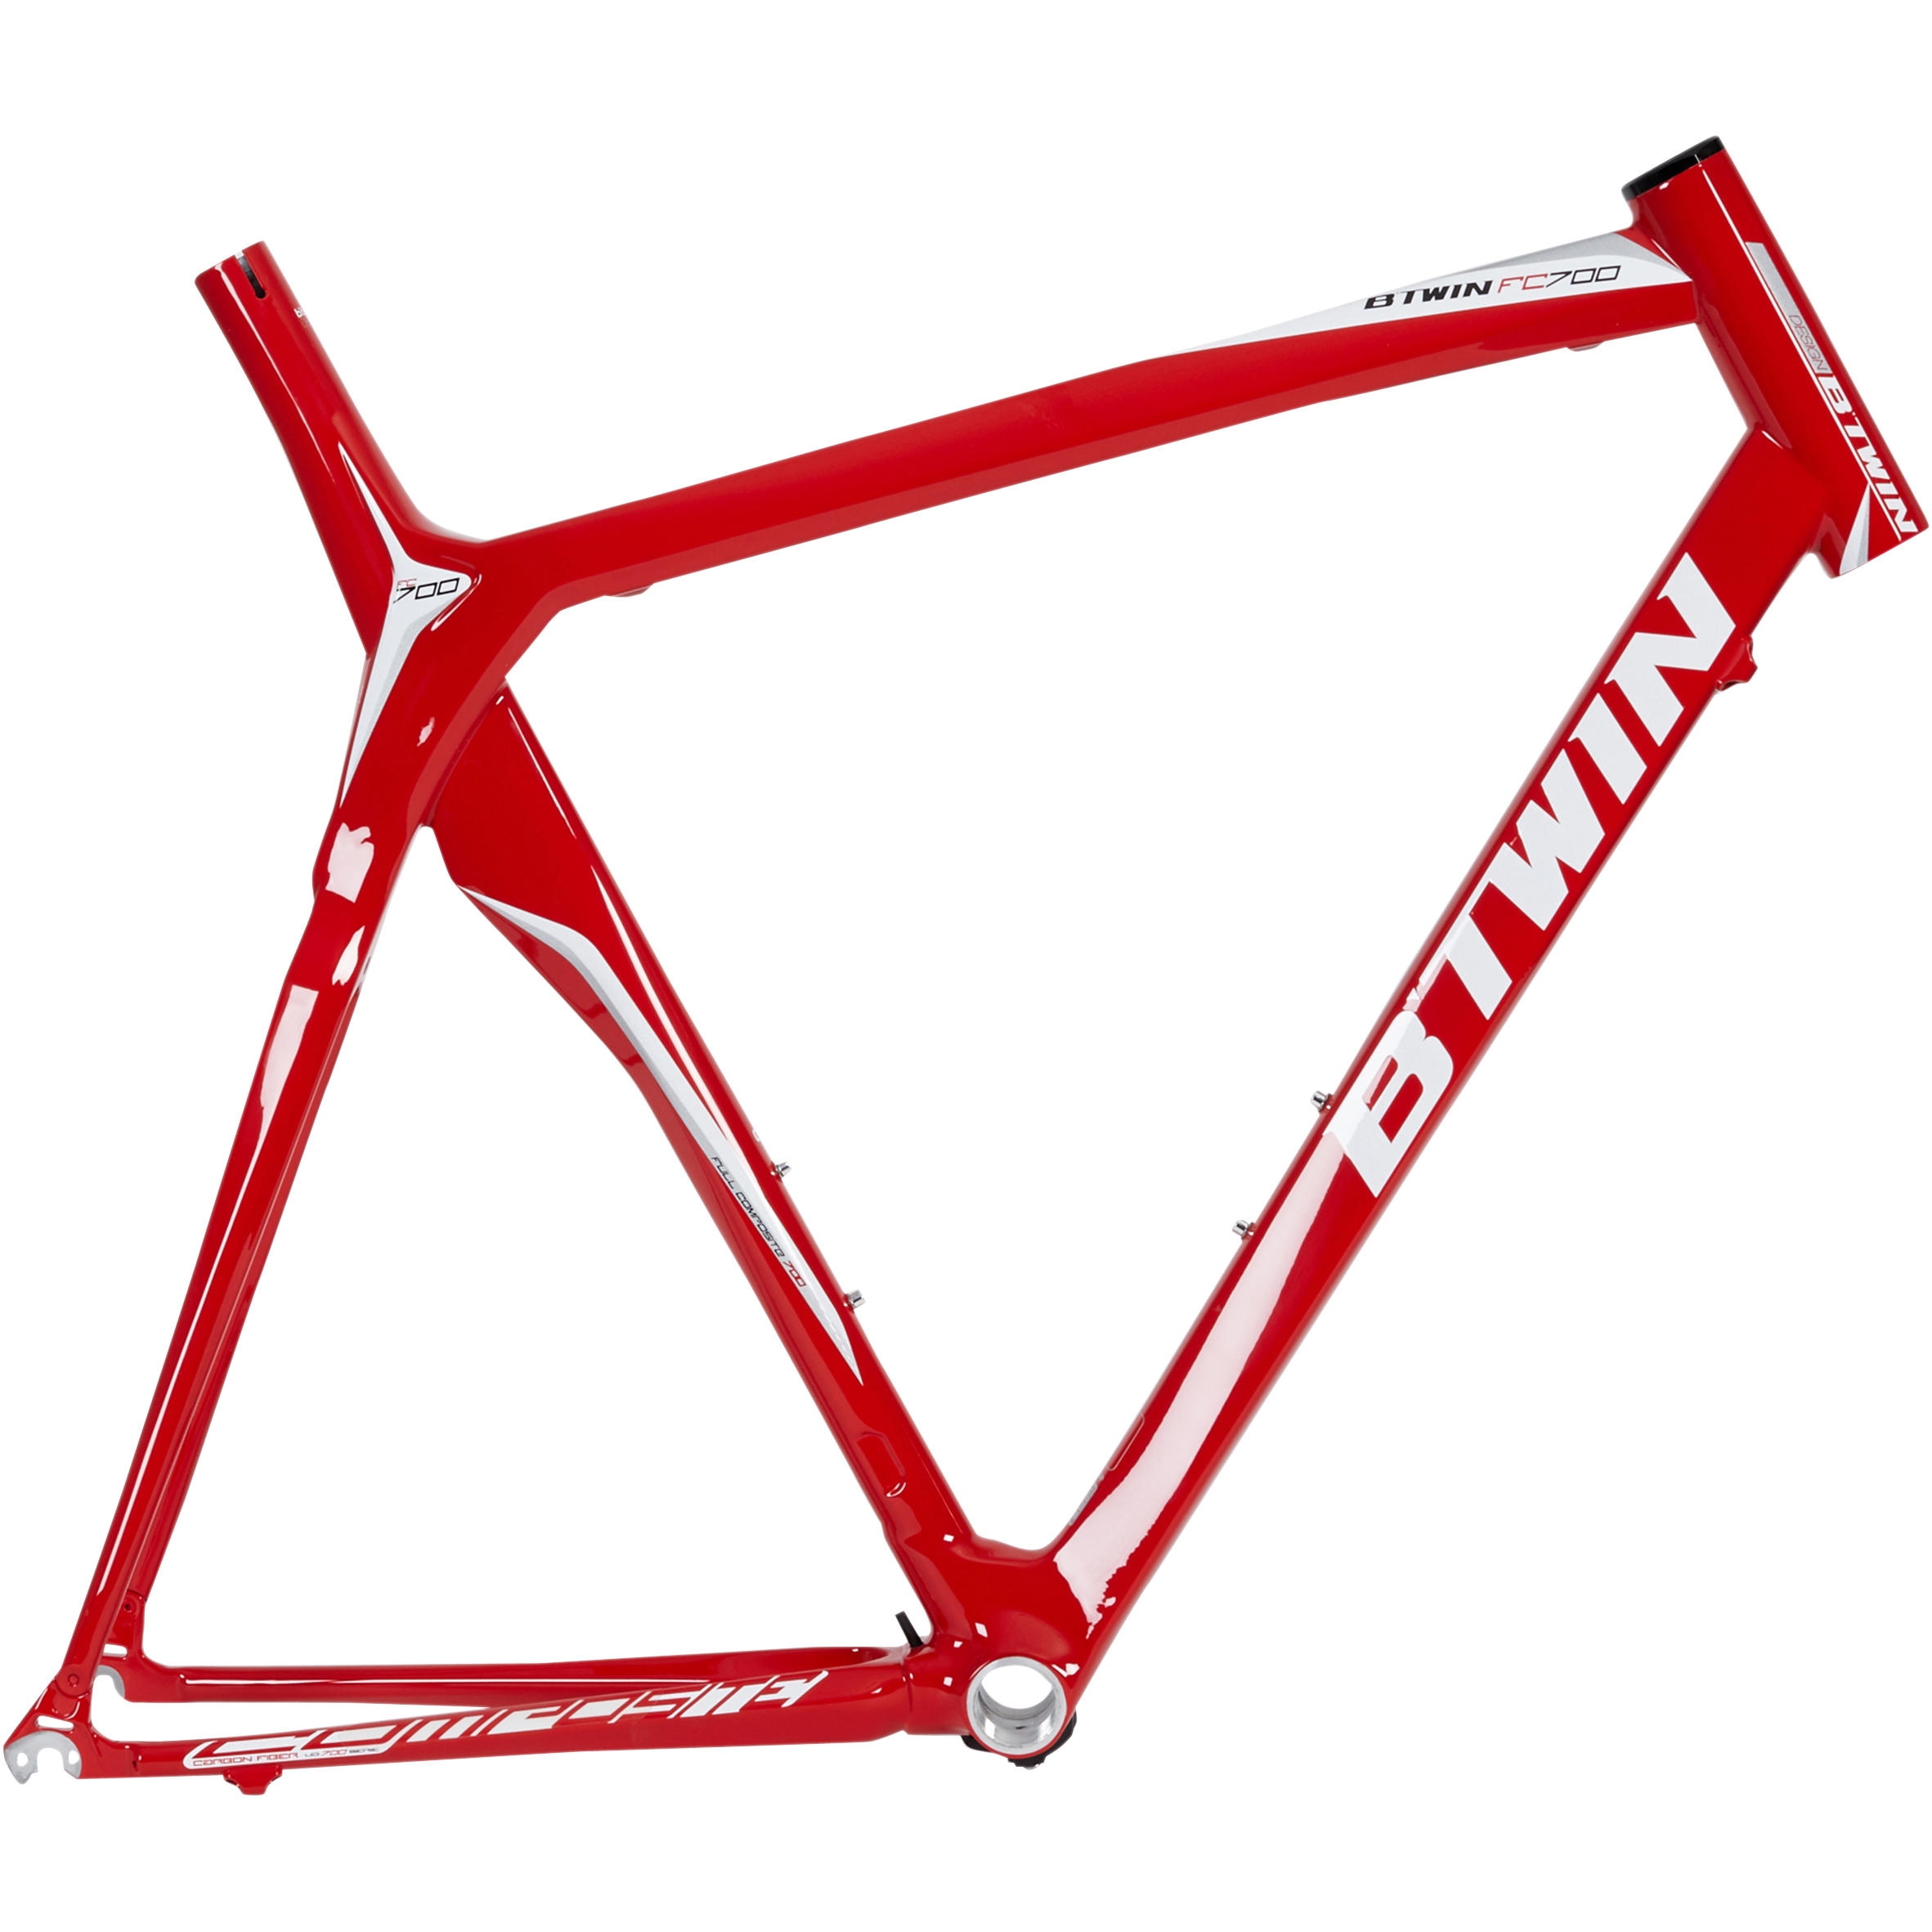 BTWIN Frame FC 7 2011